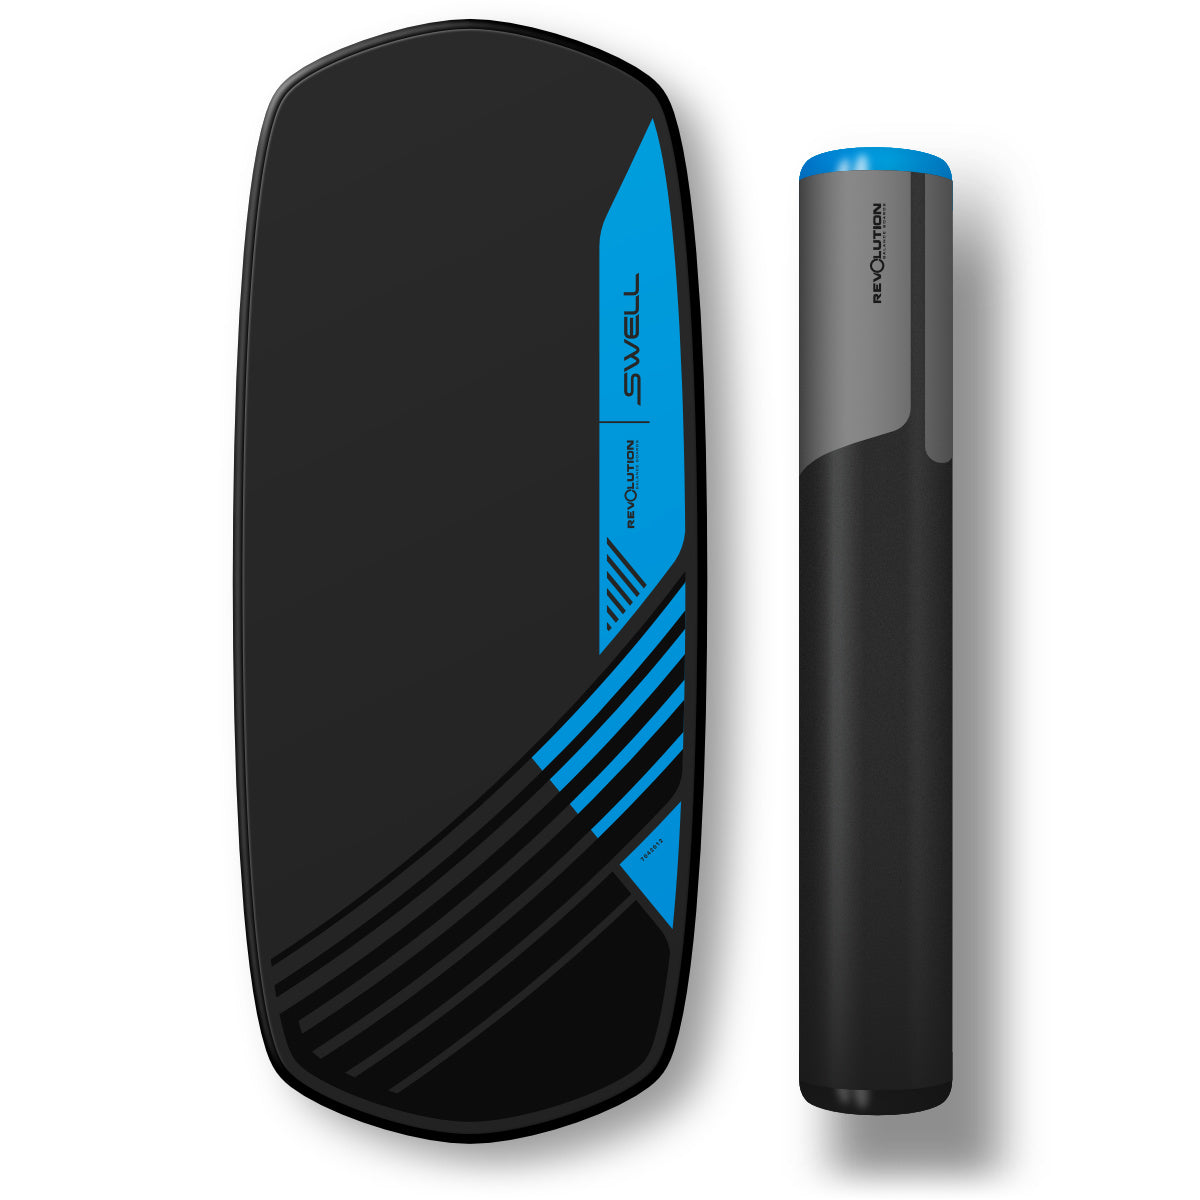 A black and blue device, known as a Revolution Swell 2.0 Balance Board, is placed next to a charger.